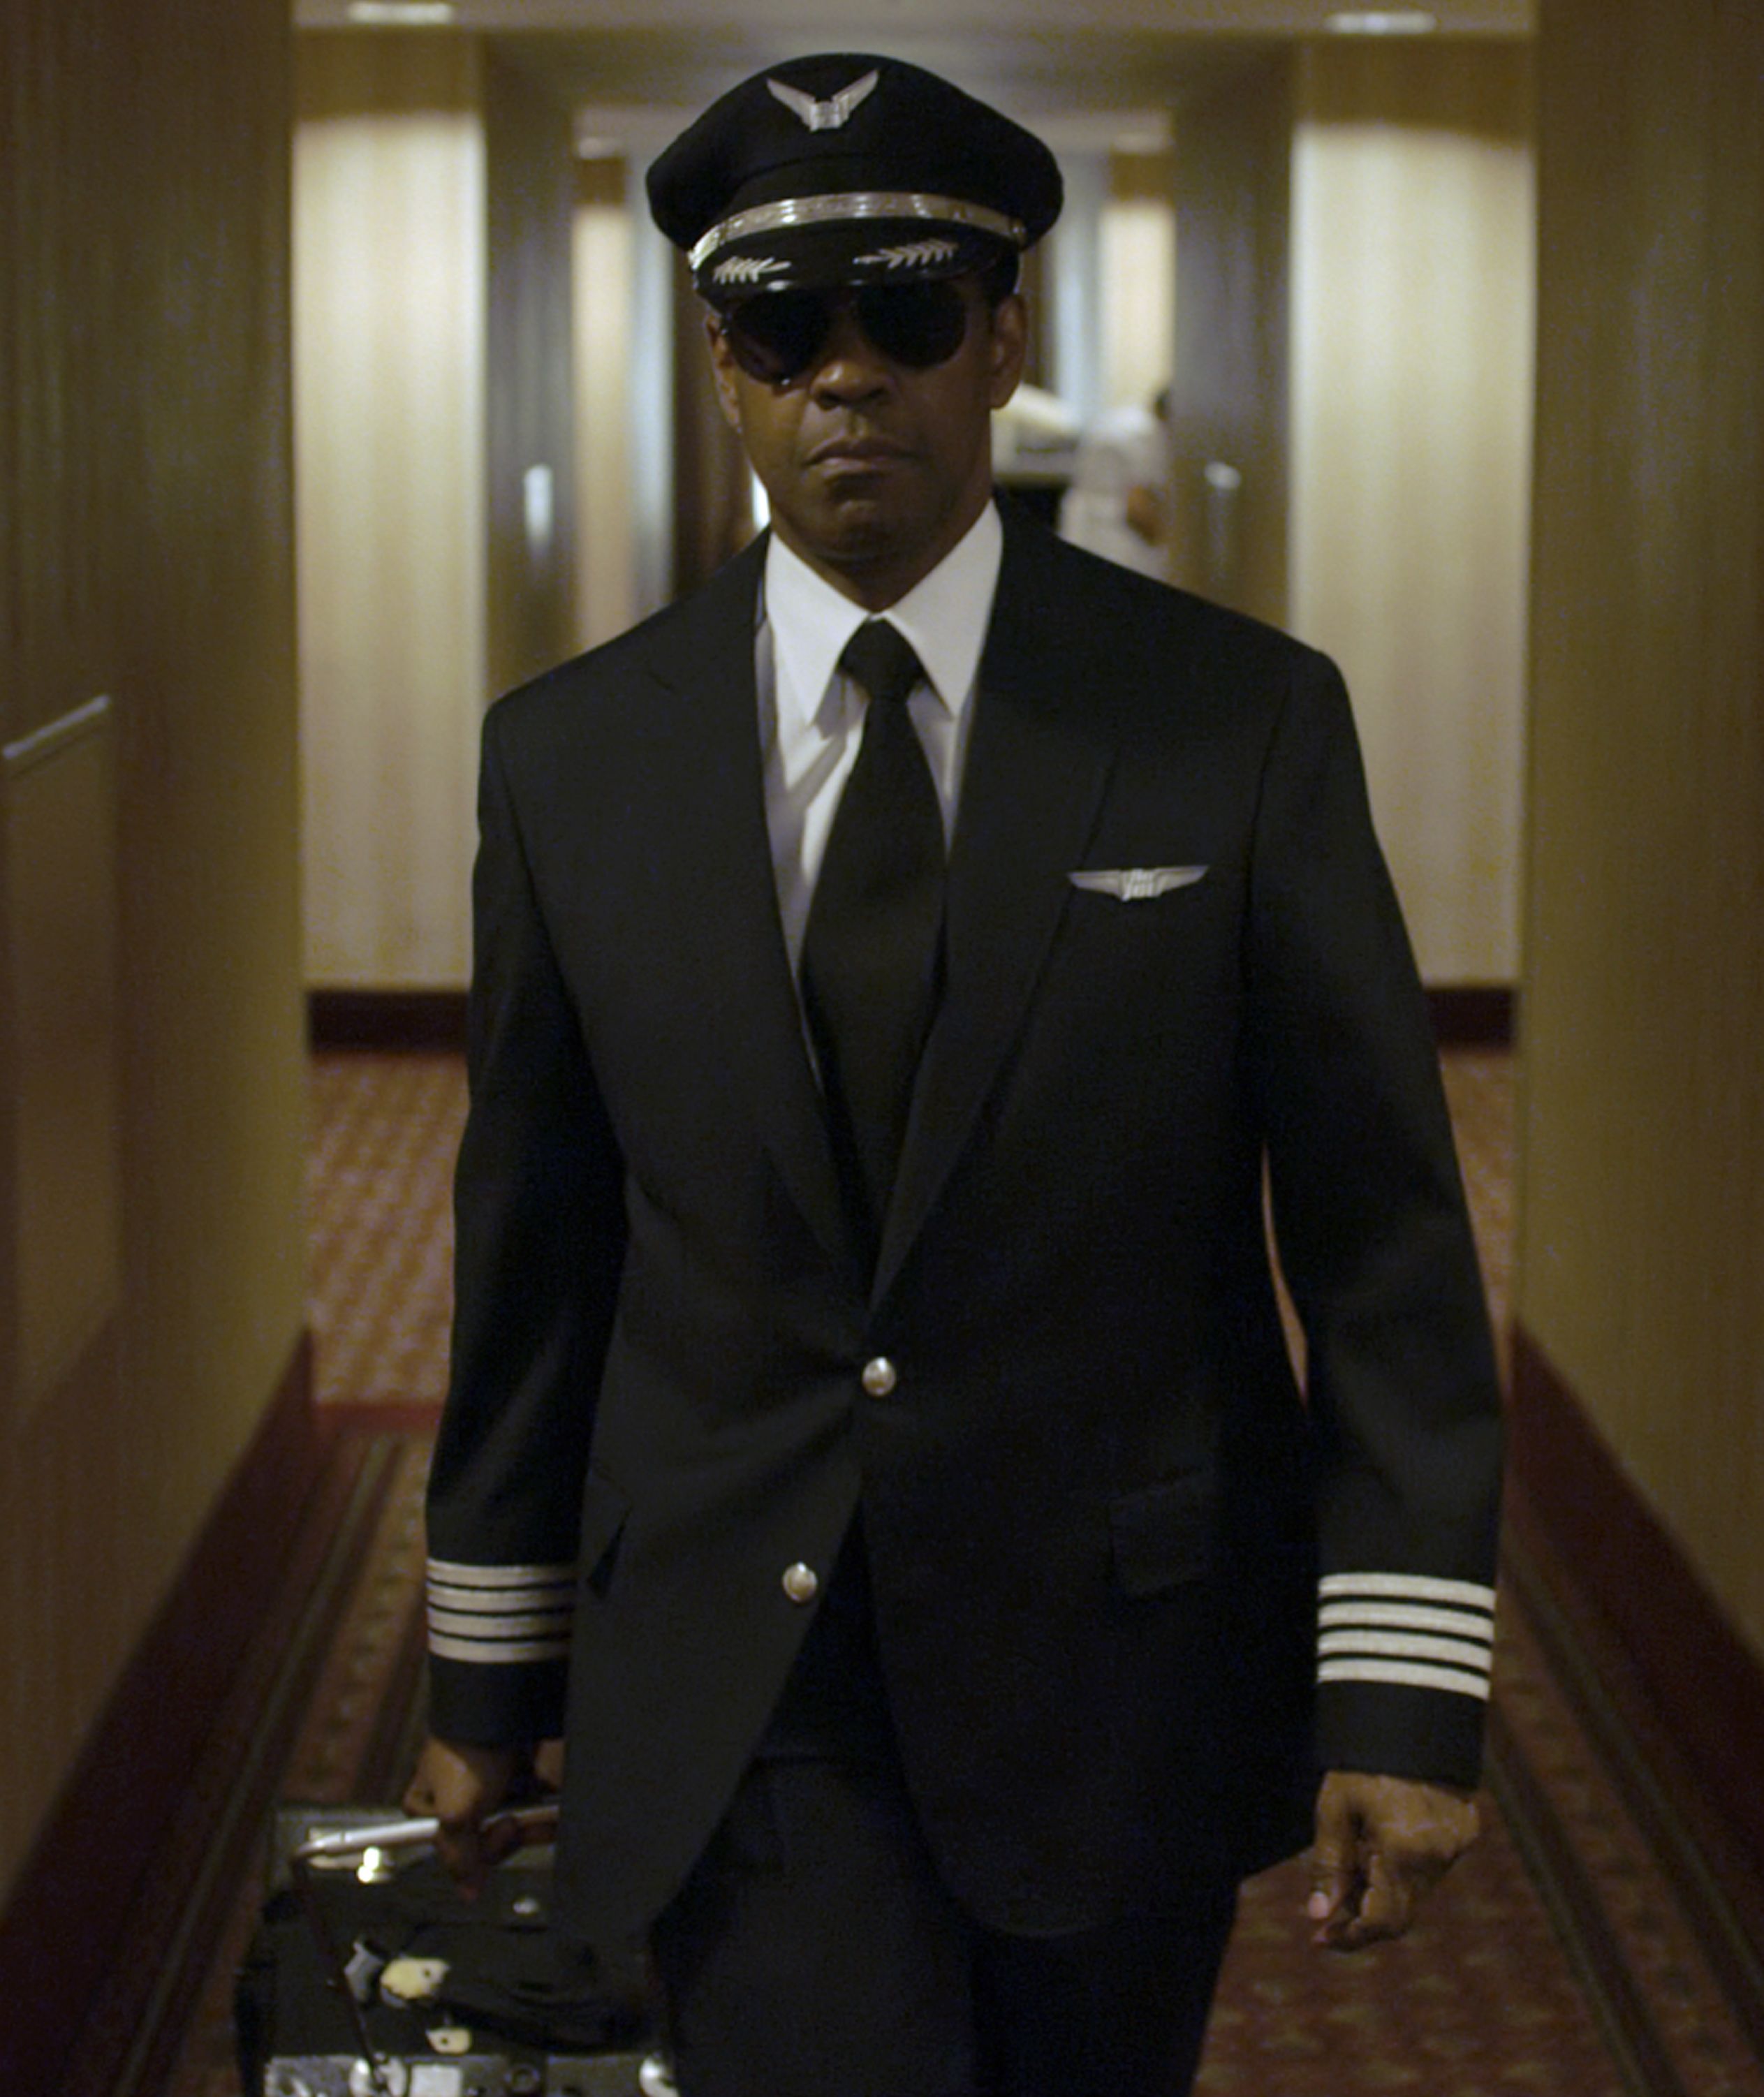 Denzel with glasses and pilot outfit - Flight